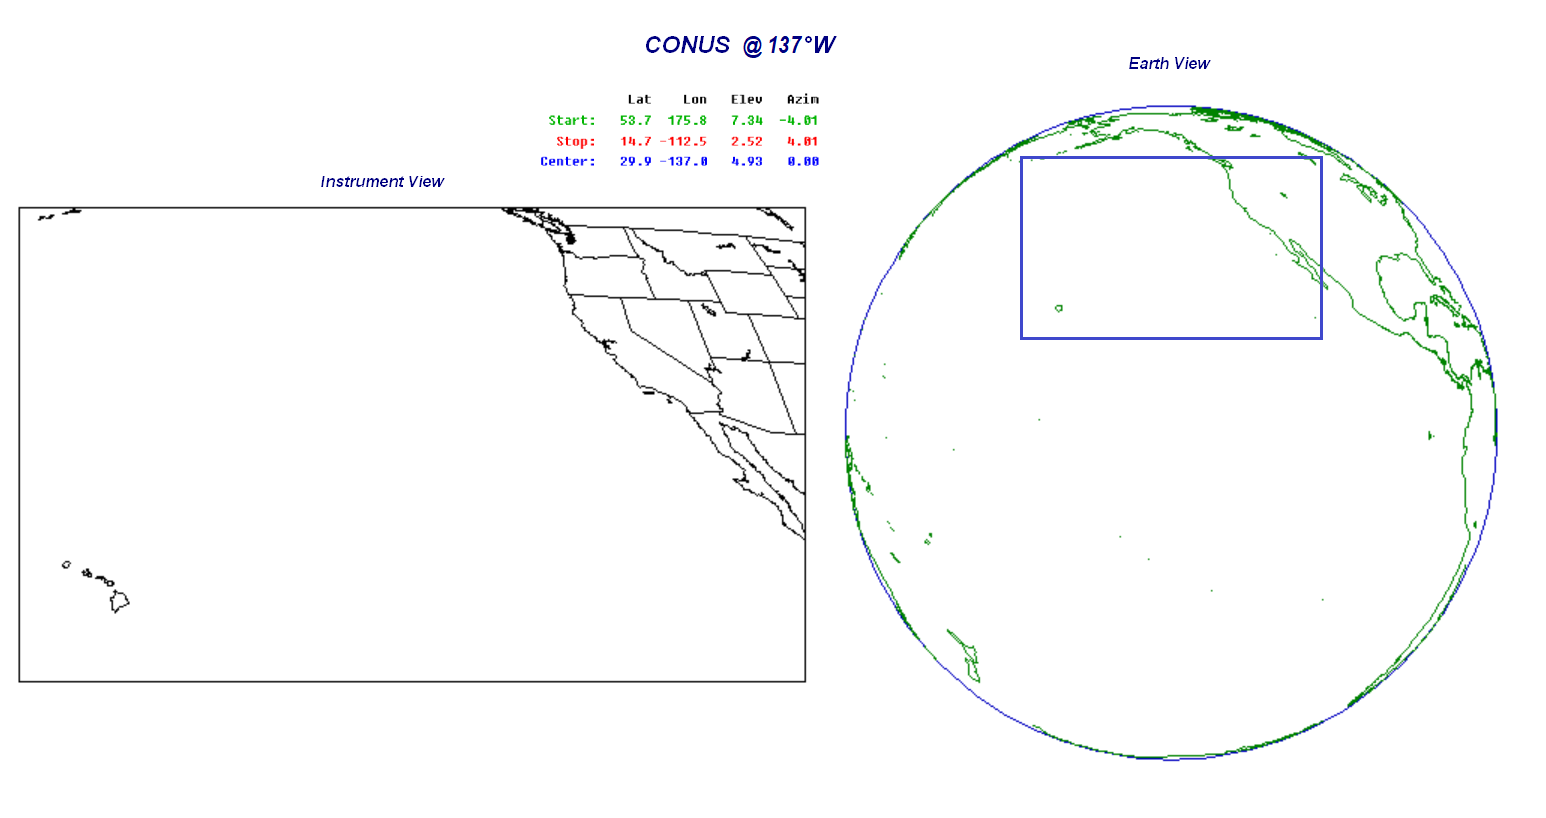 Depiction of GOES-West Imager CONUS Sector - Instrument View